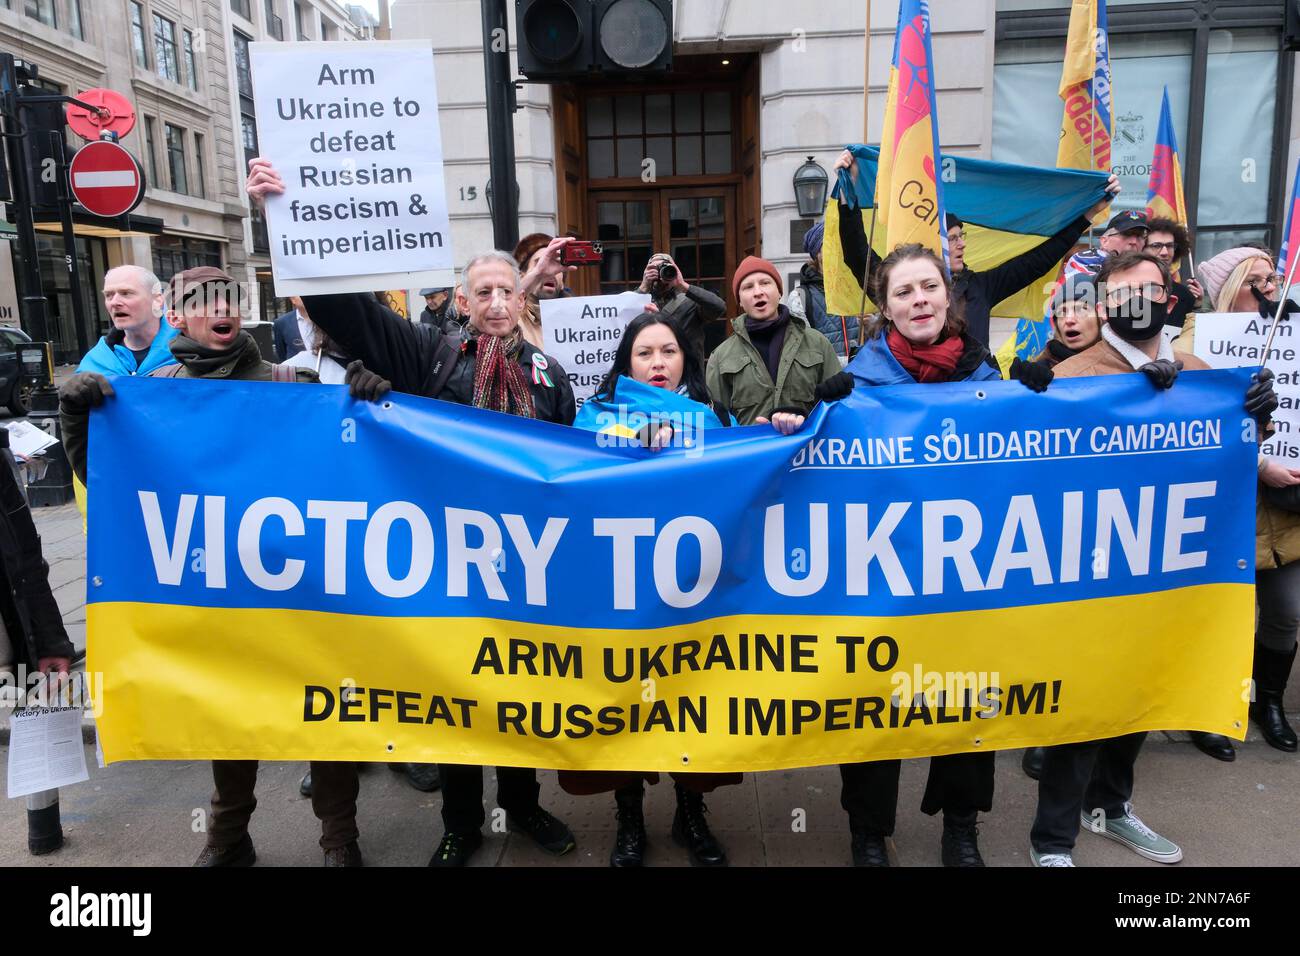 Great Portland Street, London, UK. 25th Feb 2023. A counter protest in support of Ukraine at the Stop the War coalition protest in London against the war in Ukraine, with arguments and opposing banners on view. Credit: Matthew Chattle/Alamy Live News Stock Photo